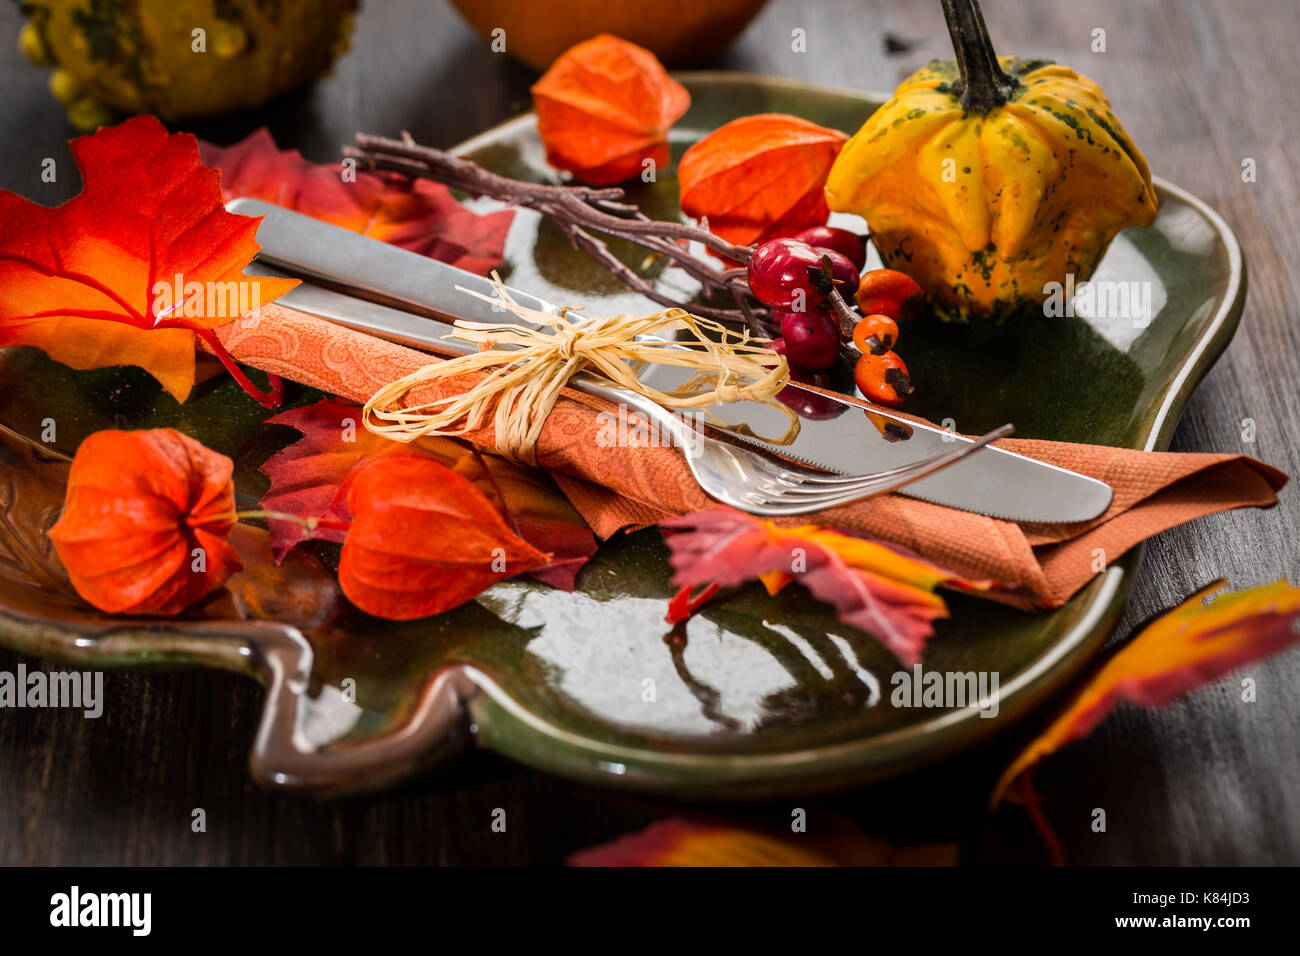 Autumn and Thanksgiving table setting Stock Photo